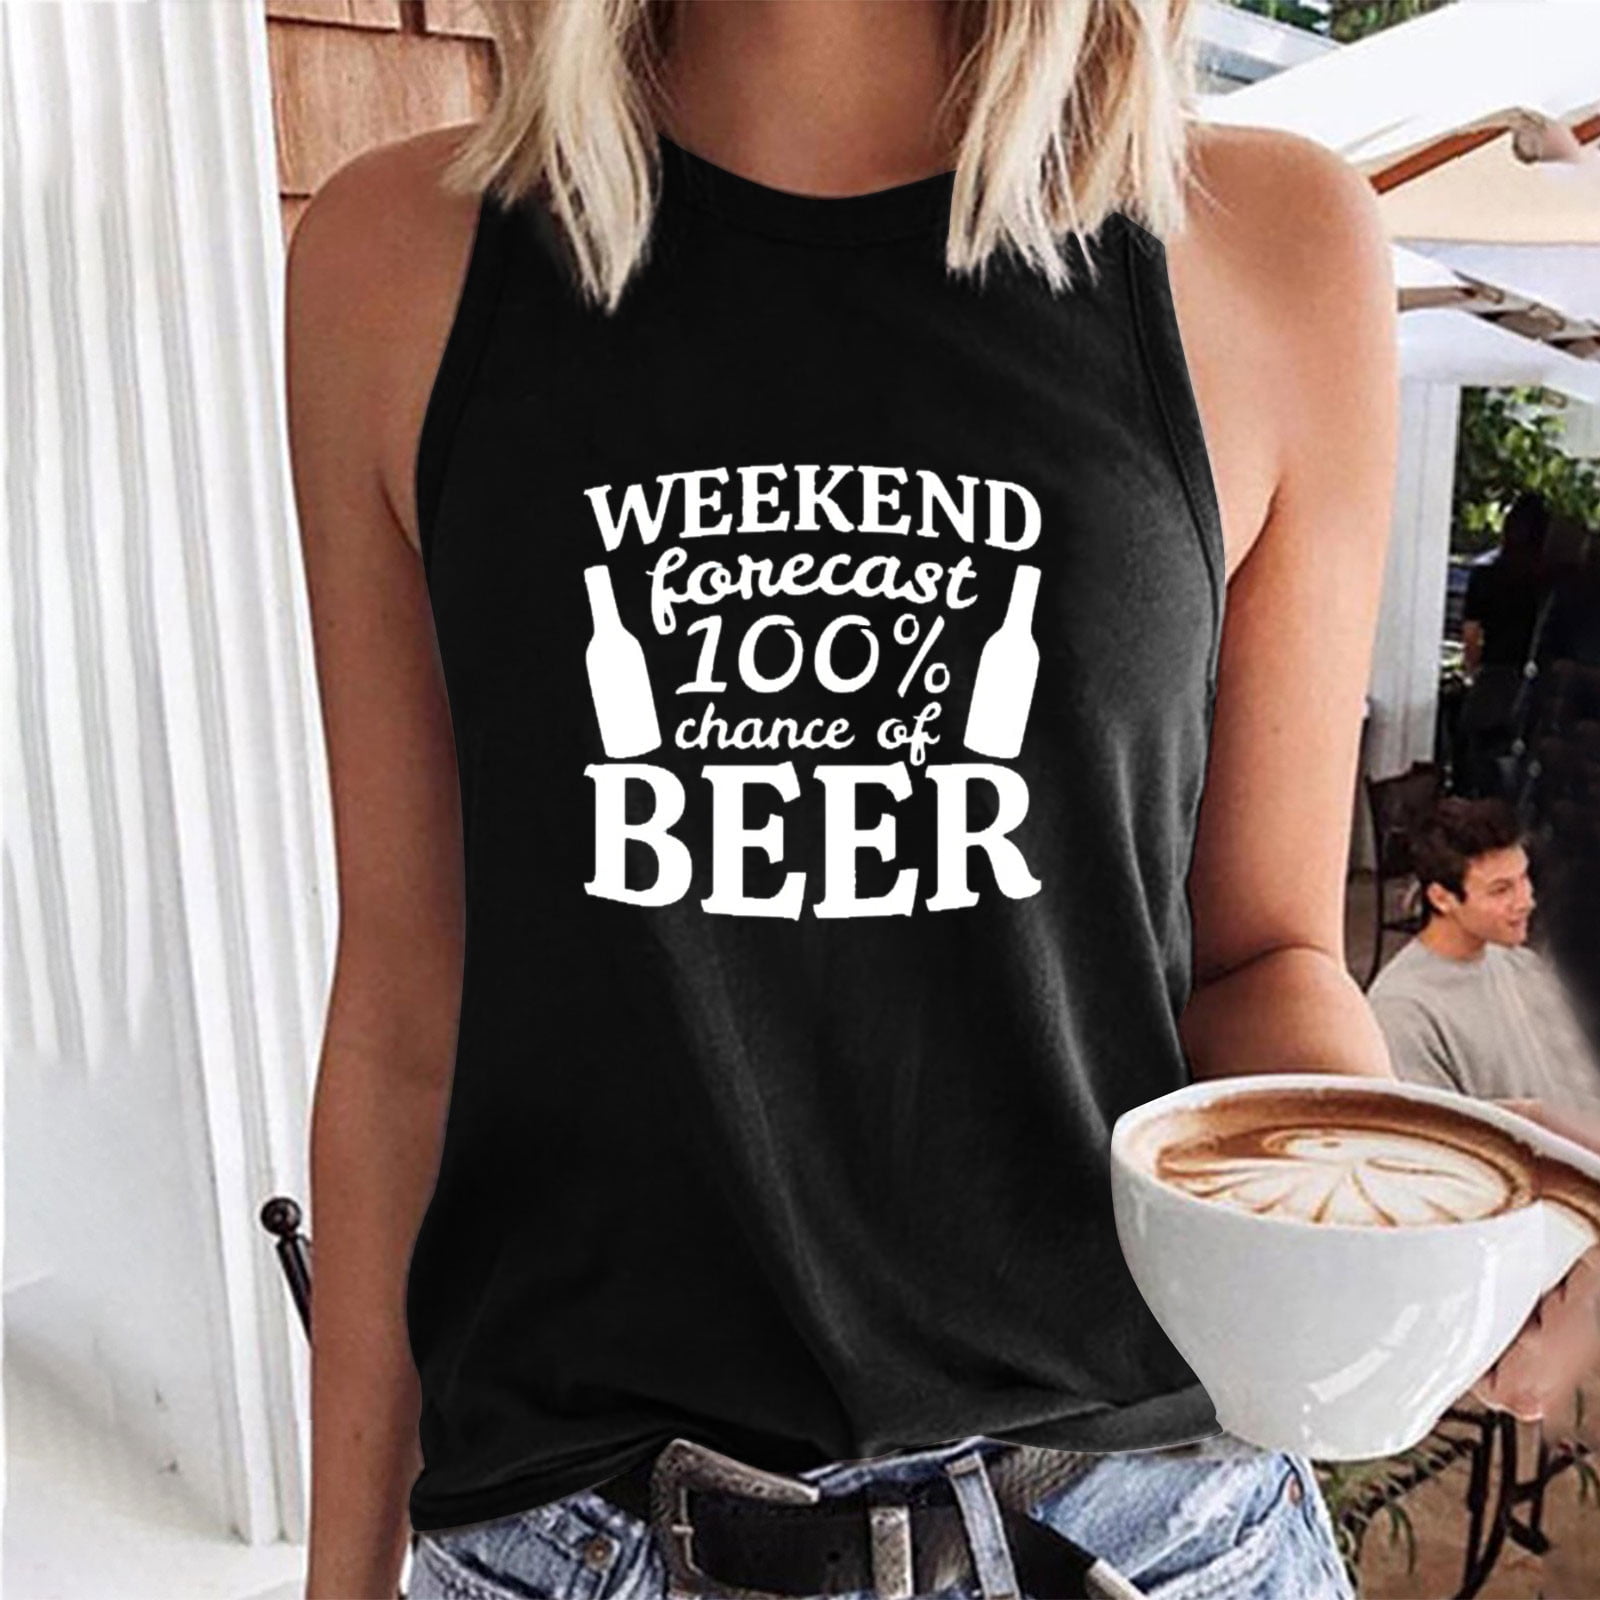 Weekend Fanecast Chance Of Beer Tank Tops for Women Cold Shoulder